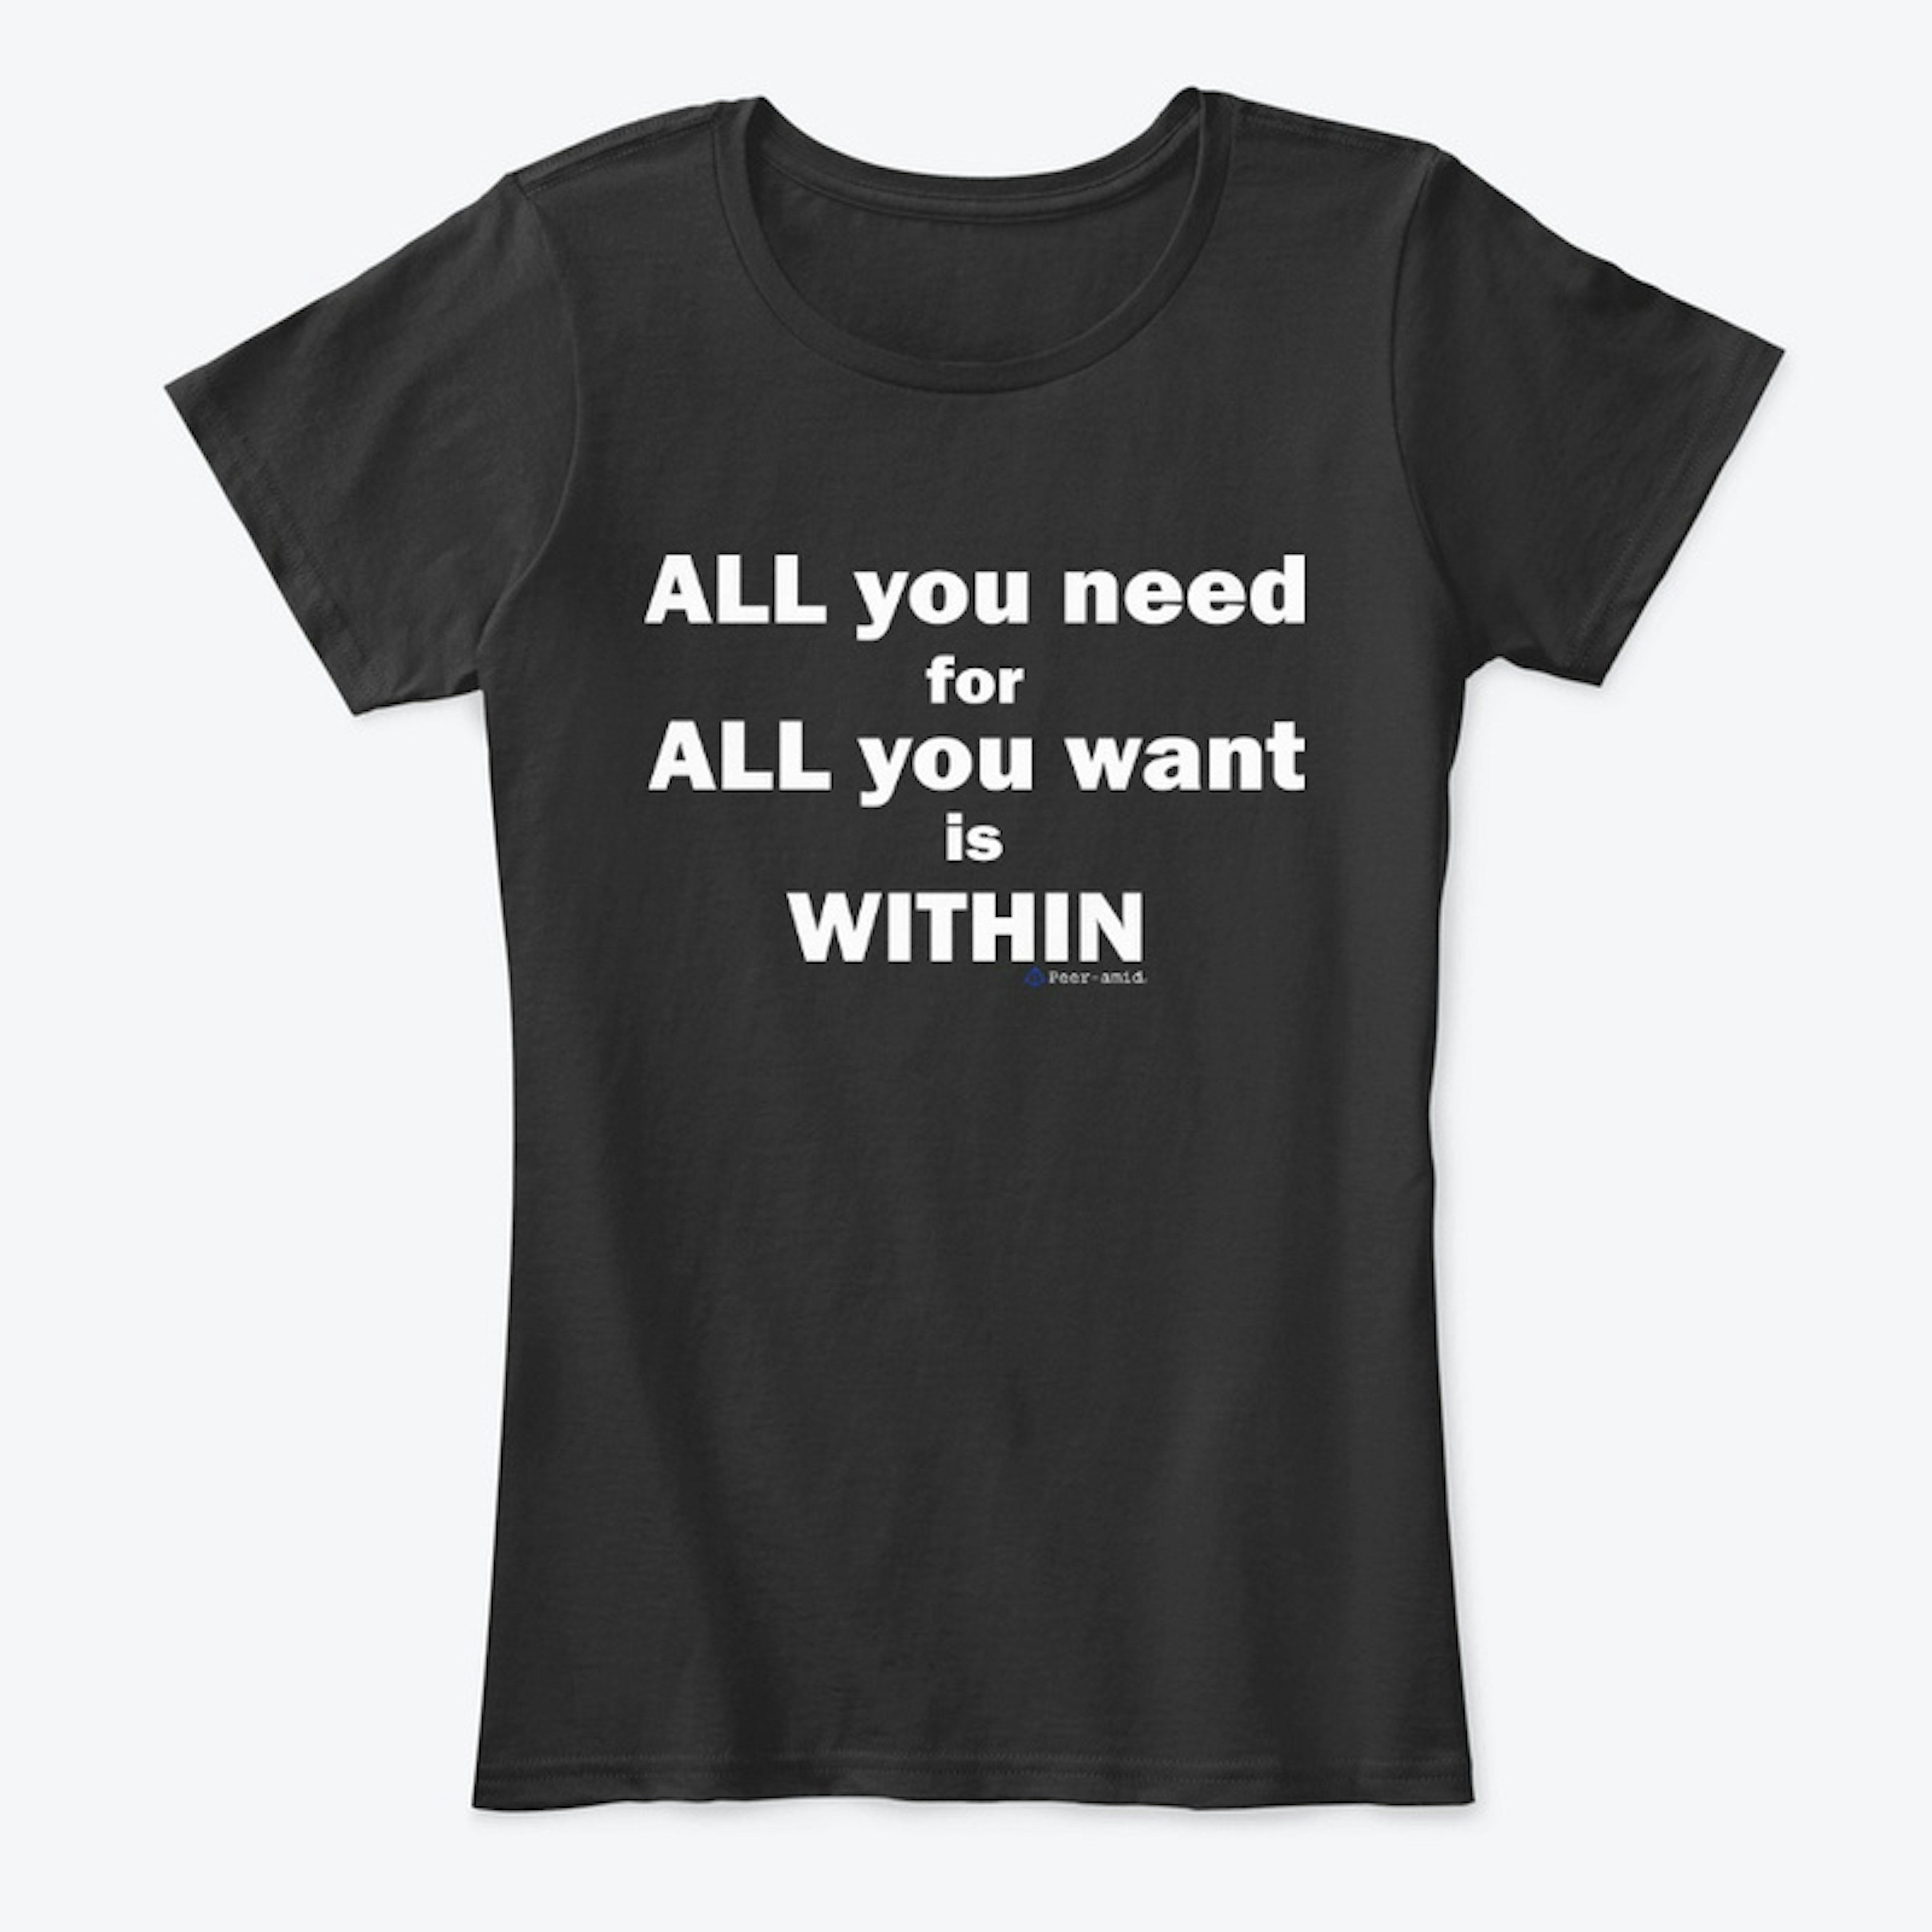 ALL YOU NEED (LARGE PRINT)